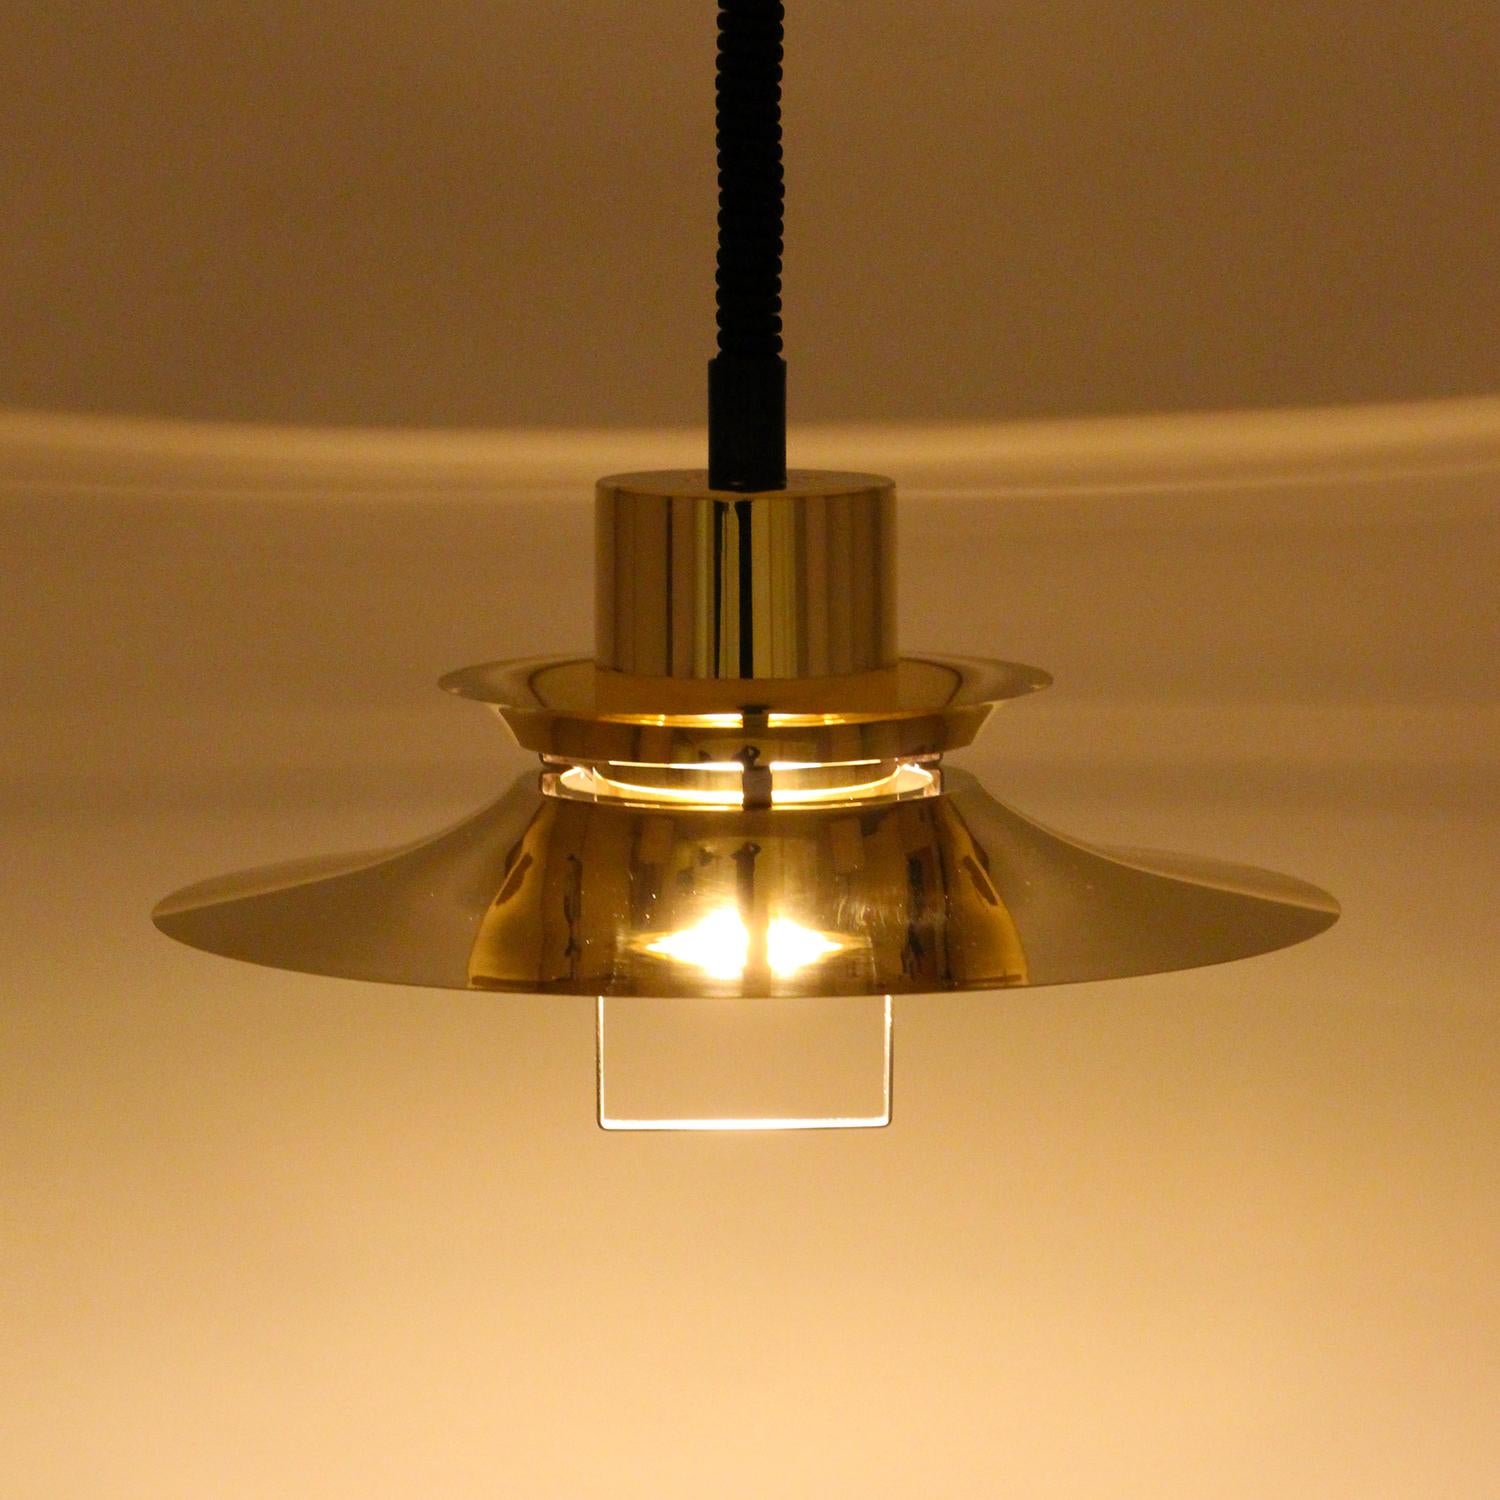 Brass Pendant, No. 23124 by Vitrika, 1960s with New Black Suspension 1